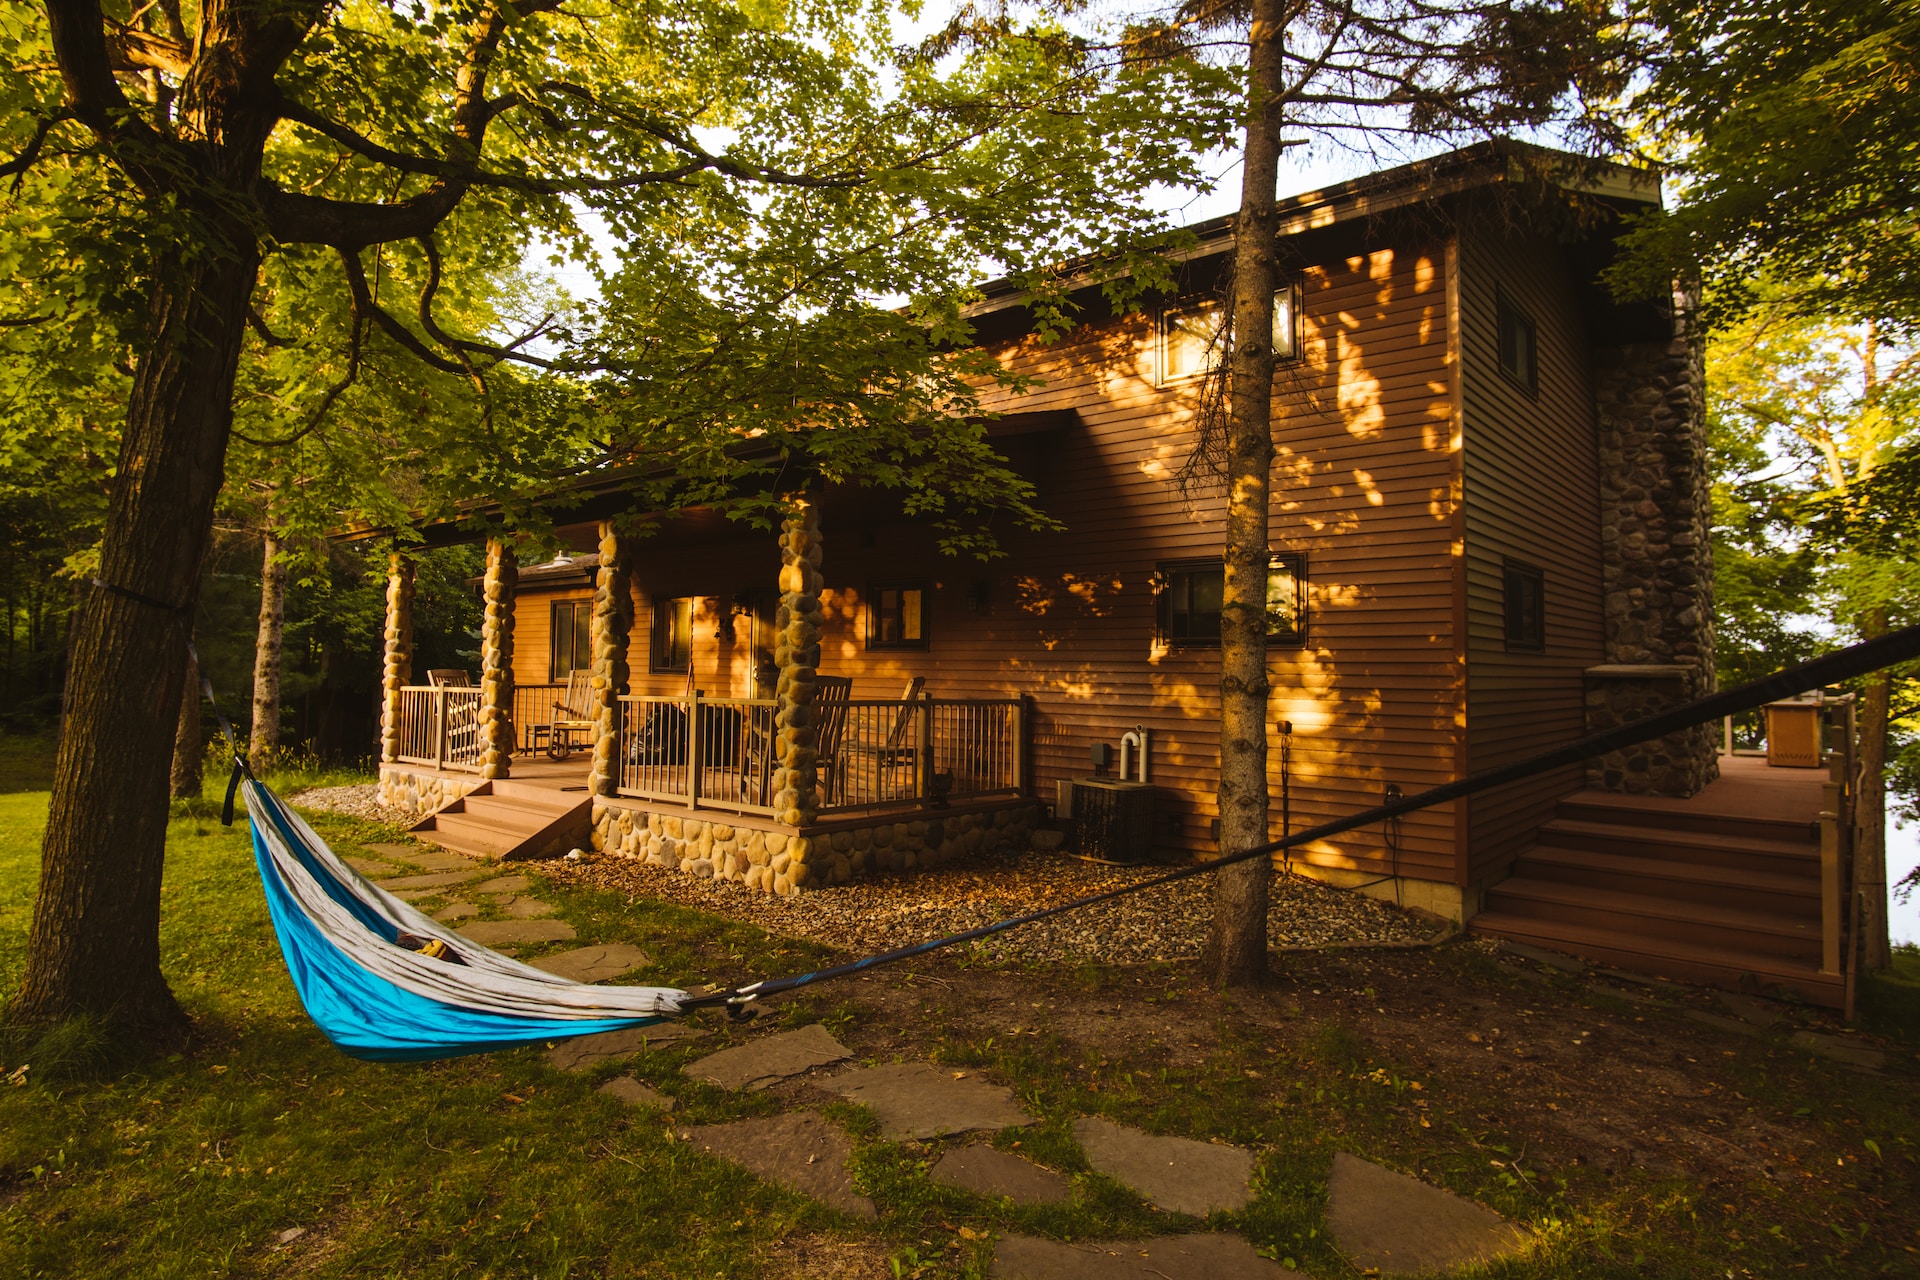 Upscale cabin with a blue hammock out front.